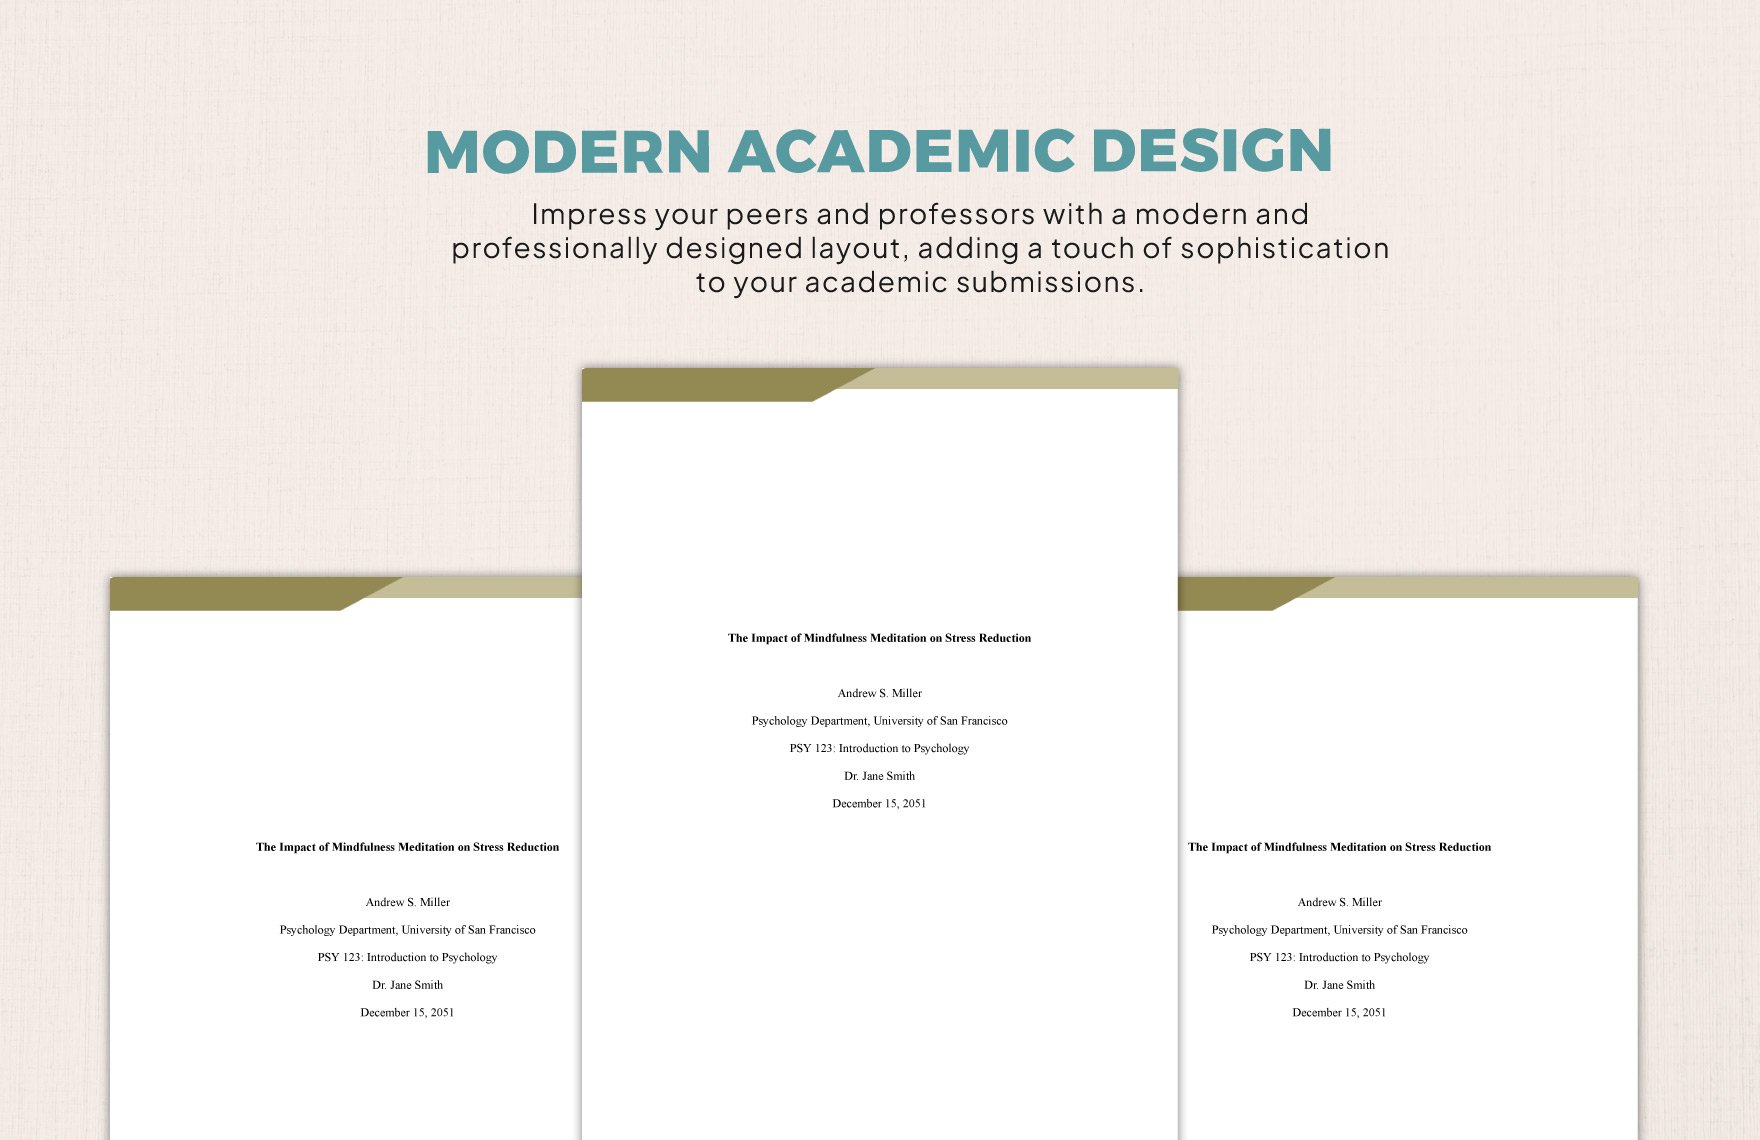 APA Title Page Template